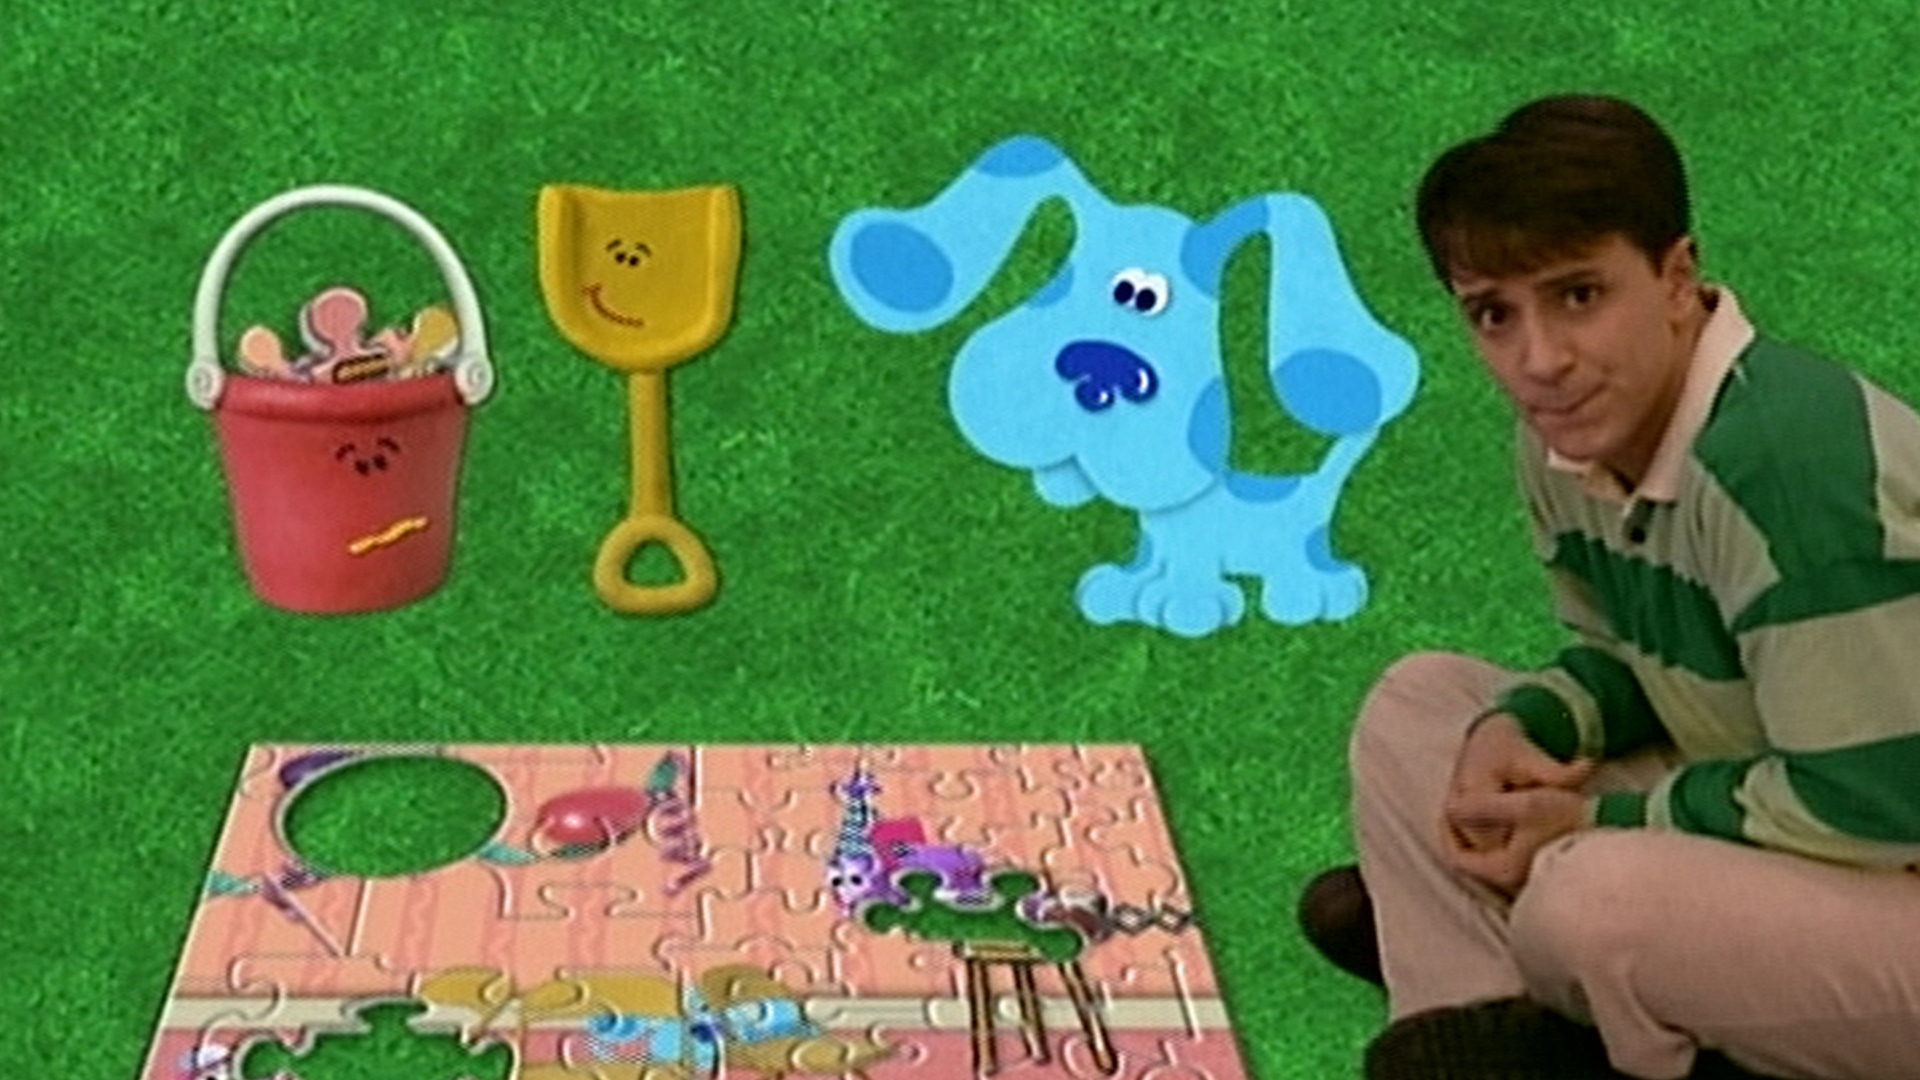 Blue S Clues Uk Clues From What Does Blue Want To Play Now | Sexiz Pix